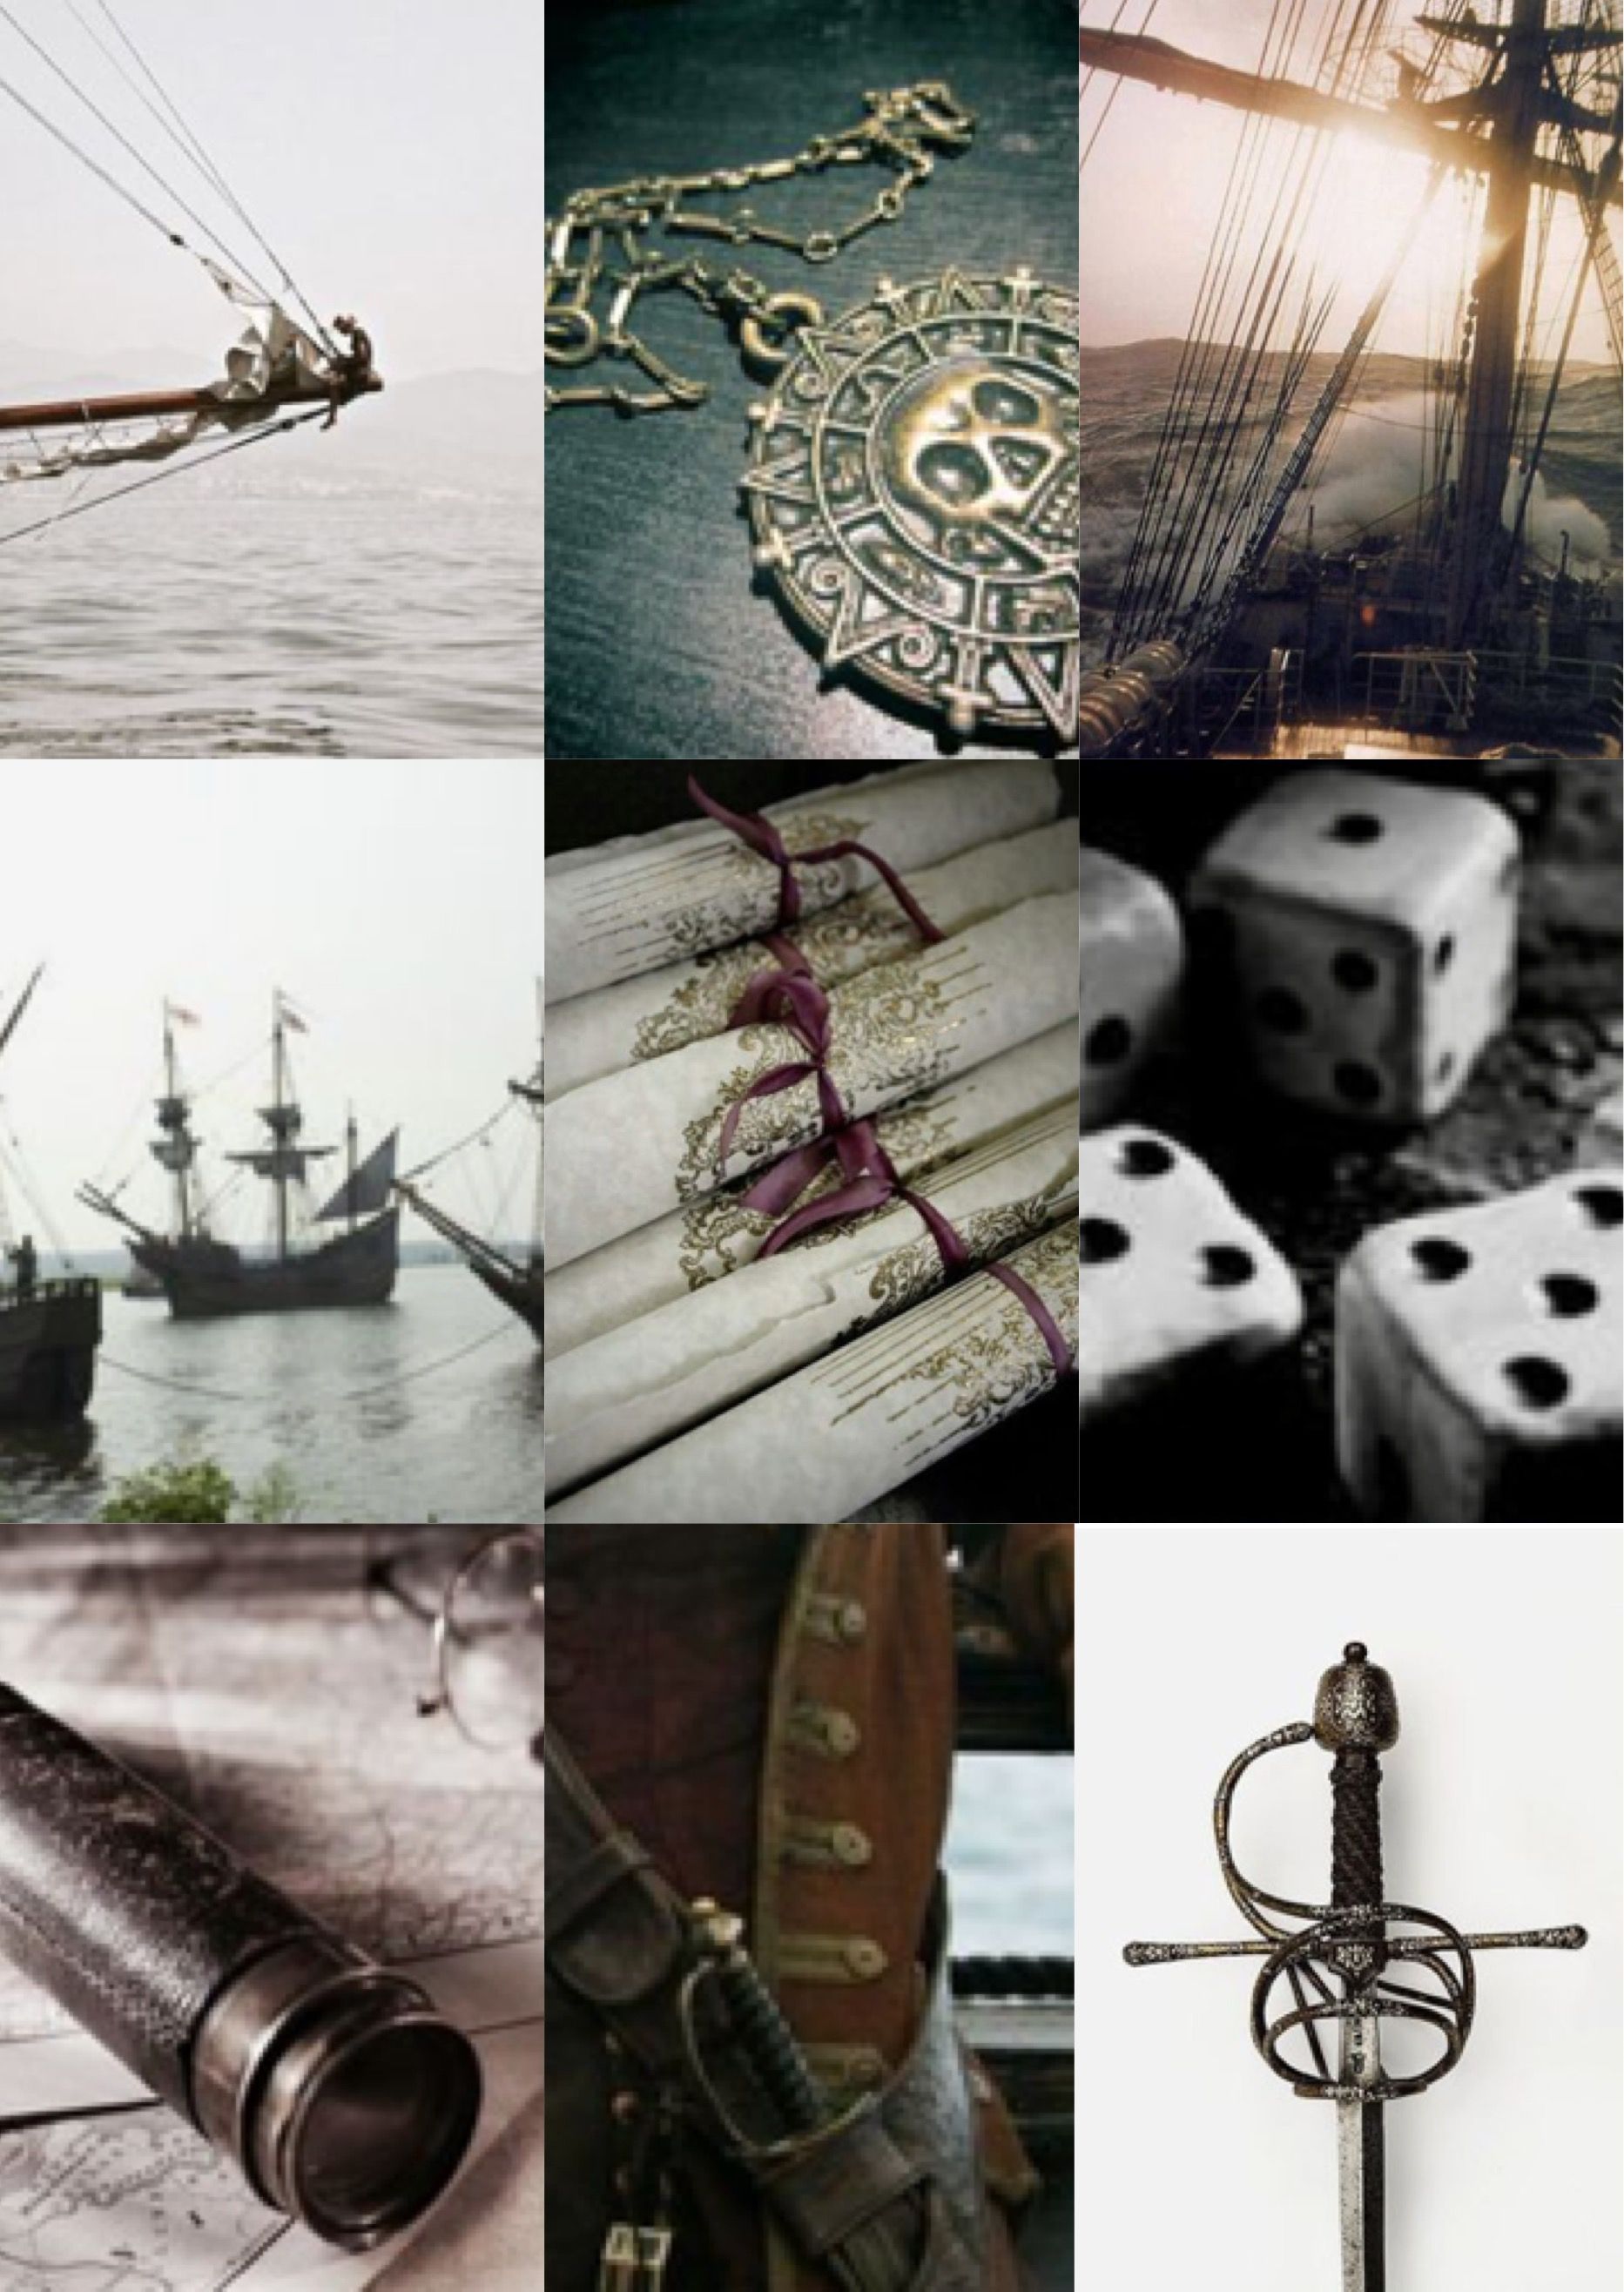 A collage of images representing the pirate aesthetic. - Pirate